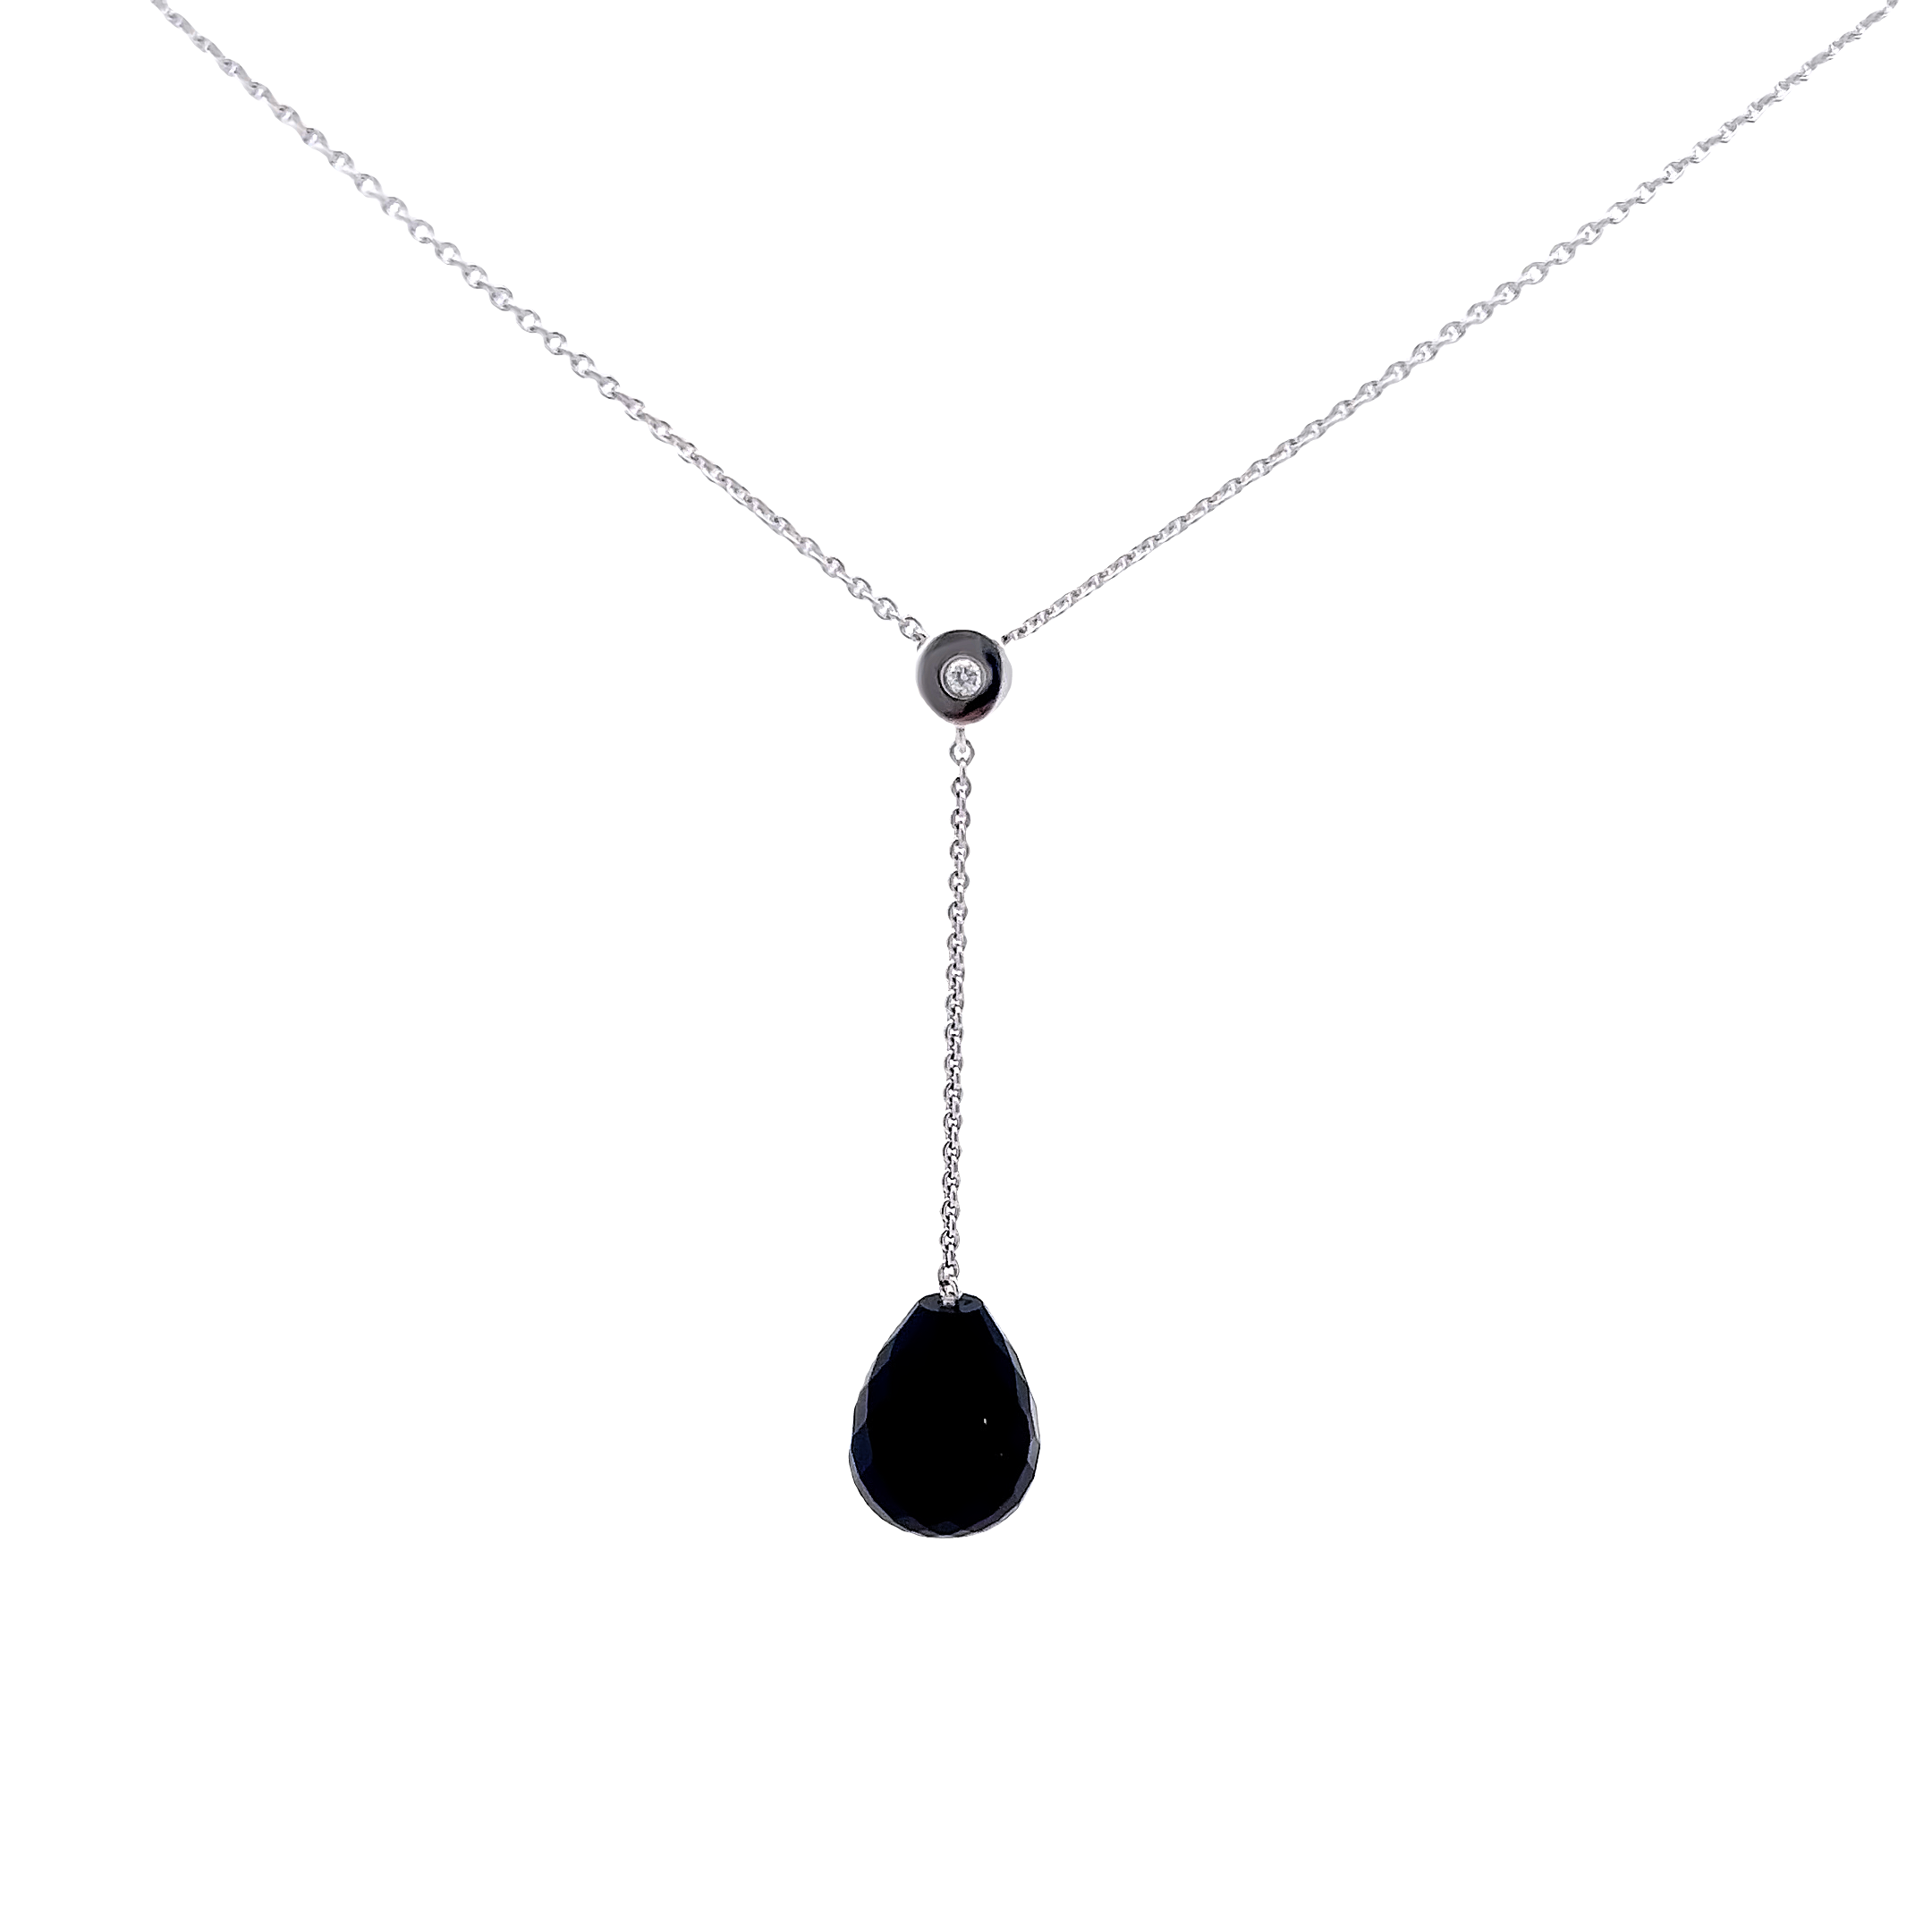 Sterling silver necklace with One 9.00X11.00mm briolette Onyx and One=.02 total weight round brilliant G VS Diamond